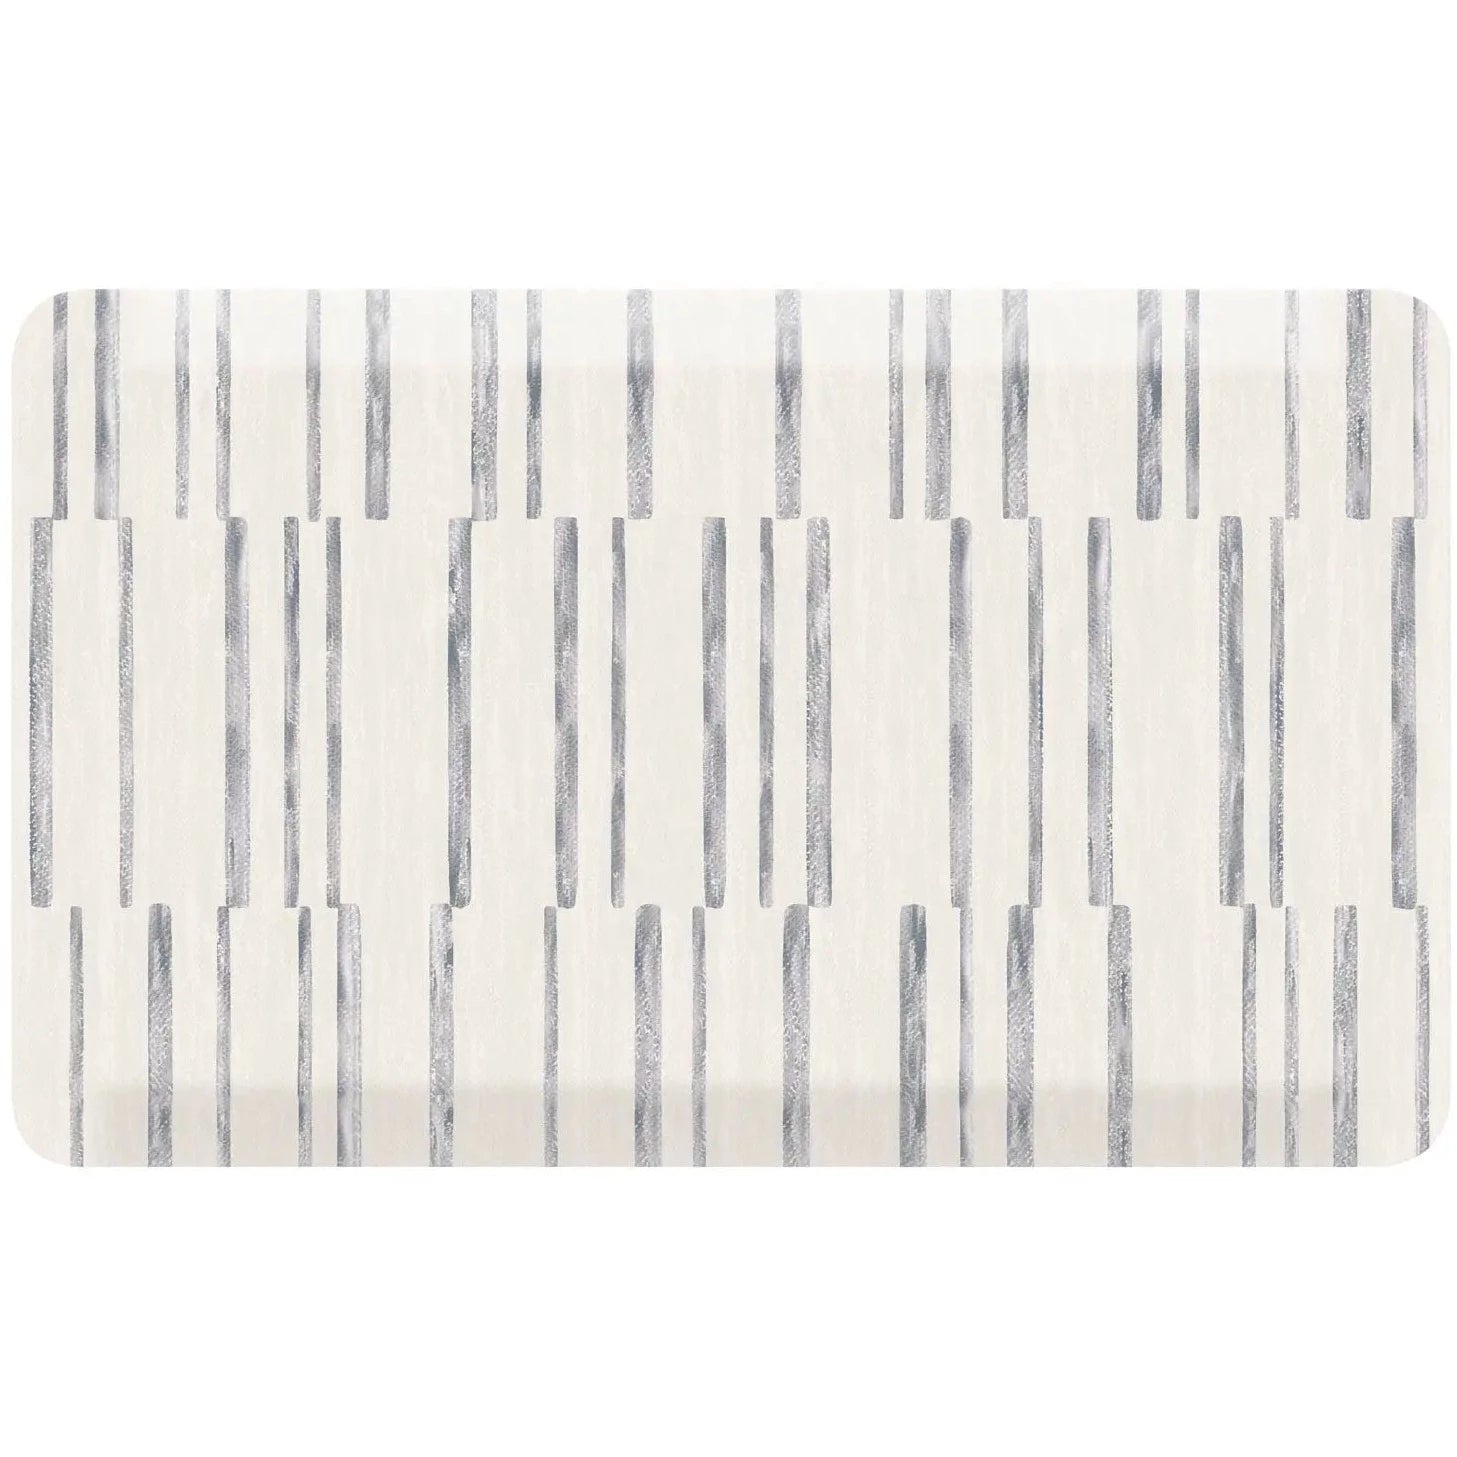 Gray and white inverted stripe kitchen mat shown in size 22x36